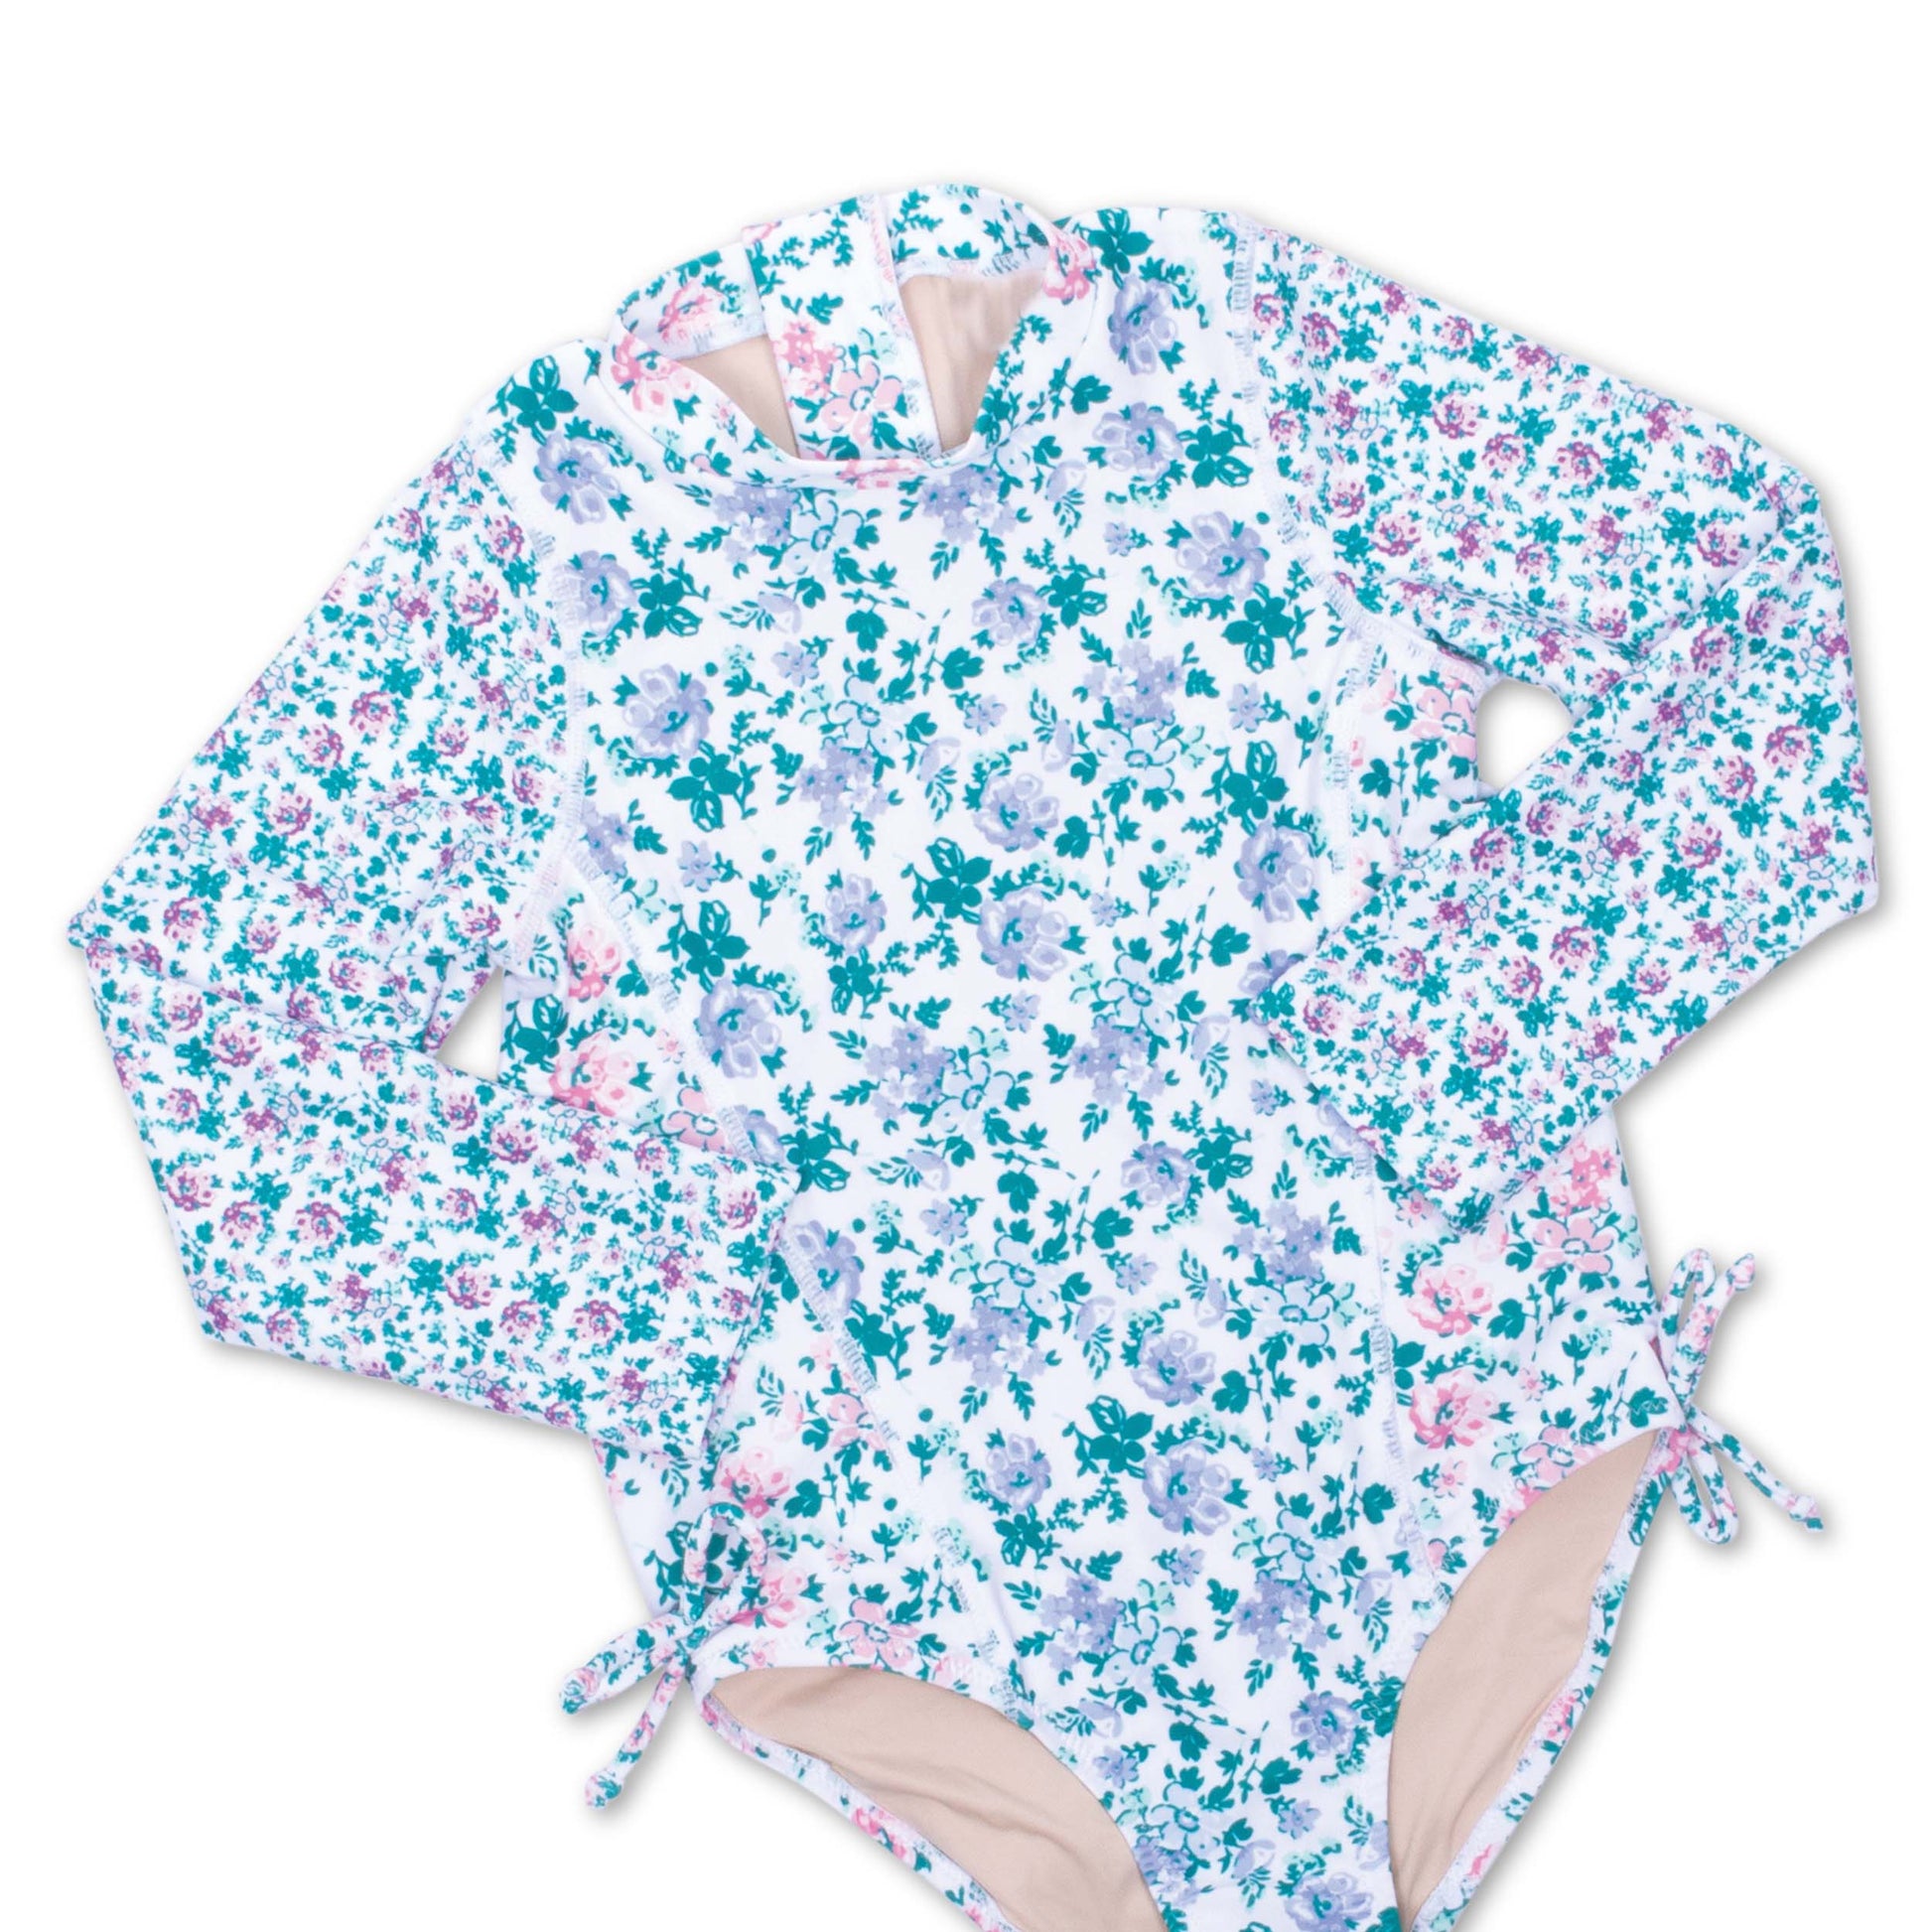 Shade Critters Floral Patchwork Longsleeve One Piece Swimsuit